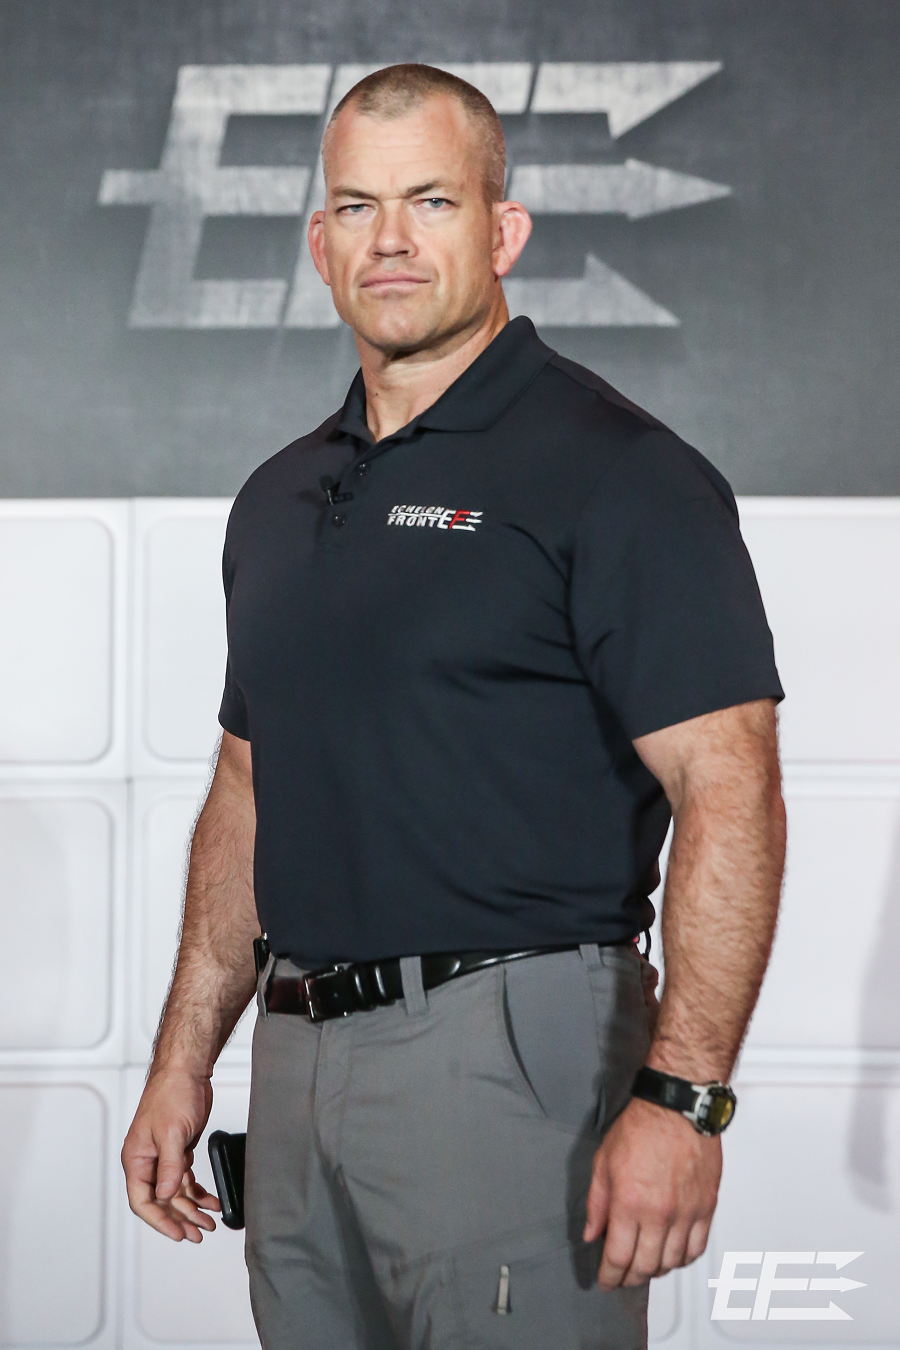 ECRM Jocko Willink to Keynote at ECRM Natural, Organic & Specialty